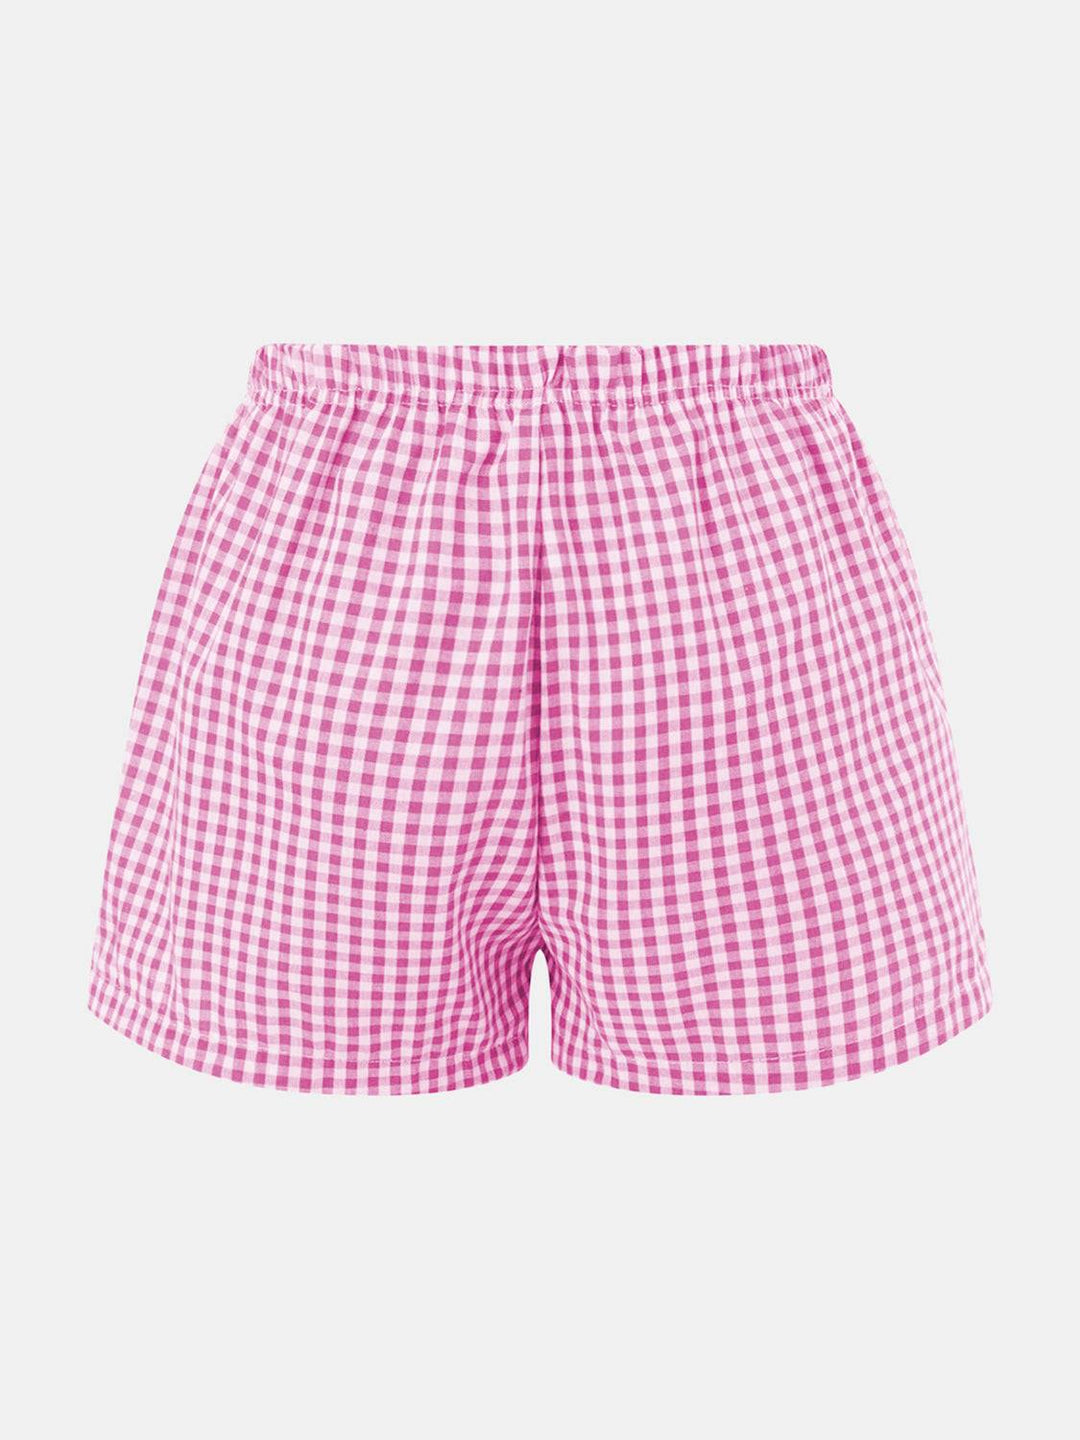 a pink and white checkered shorts